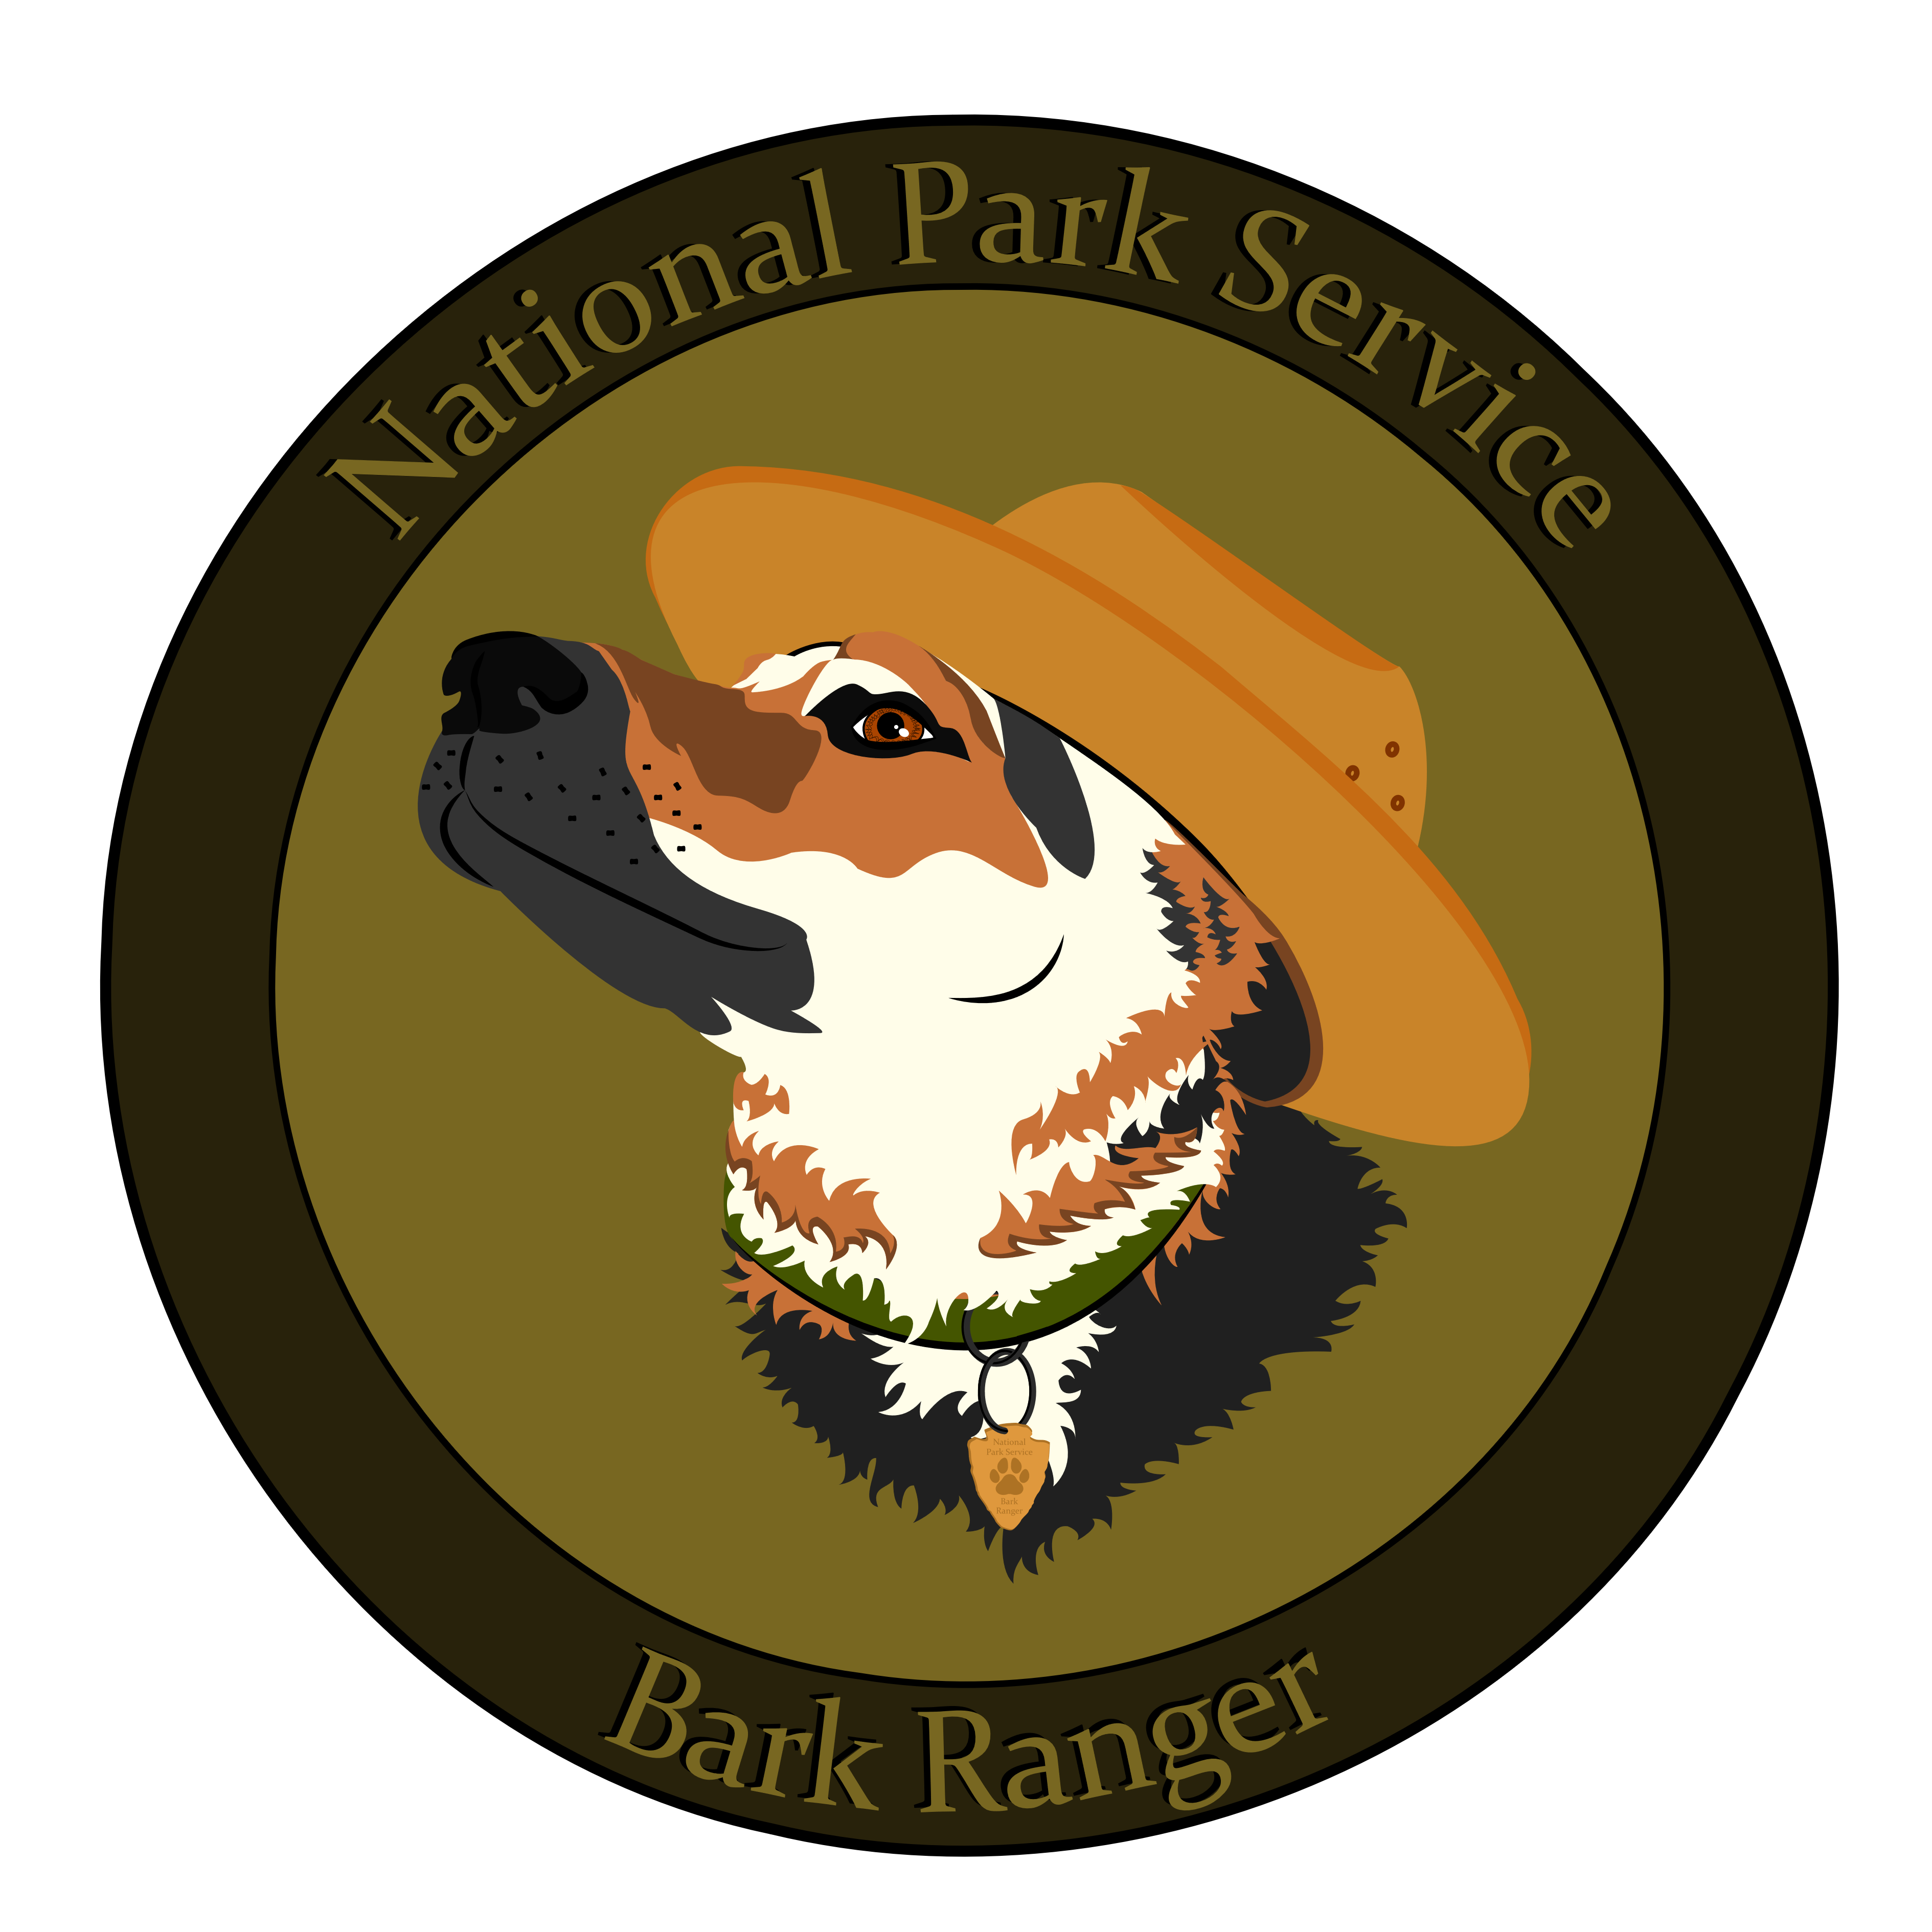 An illustrated, furry dog wears a park ranger hat while looking upwards.  The words "National Park Service Bark Ranger" fill much of the green, circular frame.